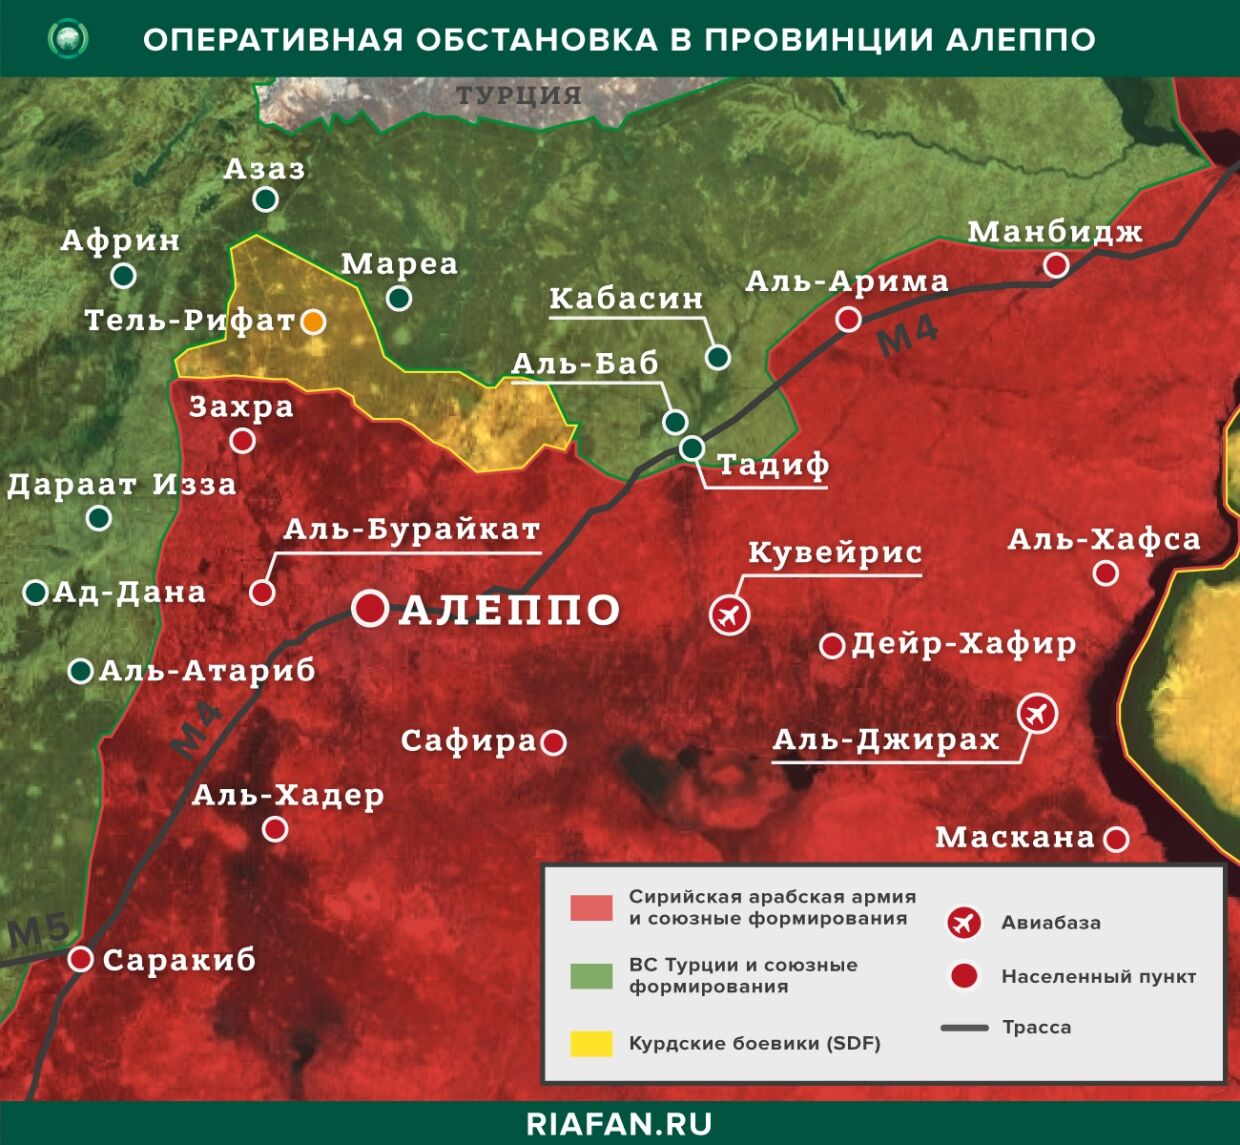 Syria the results of the day on 17 April 06.00: IG * made two sorties in Daria, the explosion in Hasak killed five militants